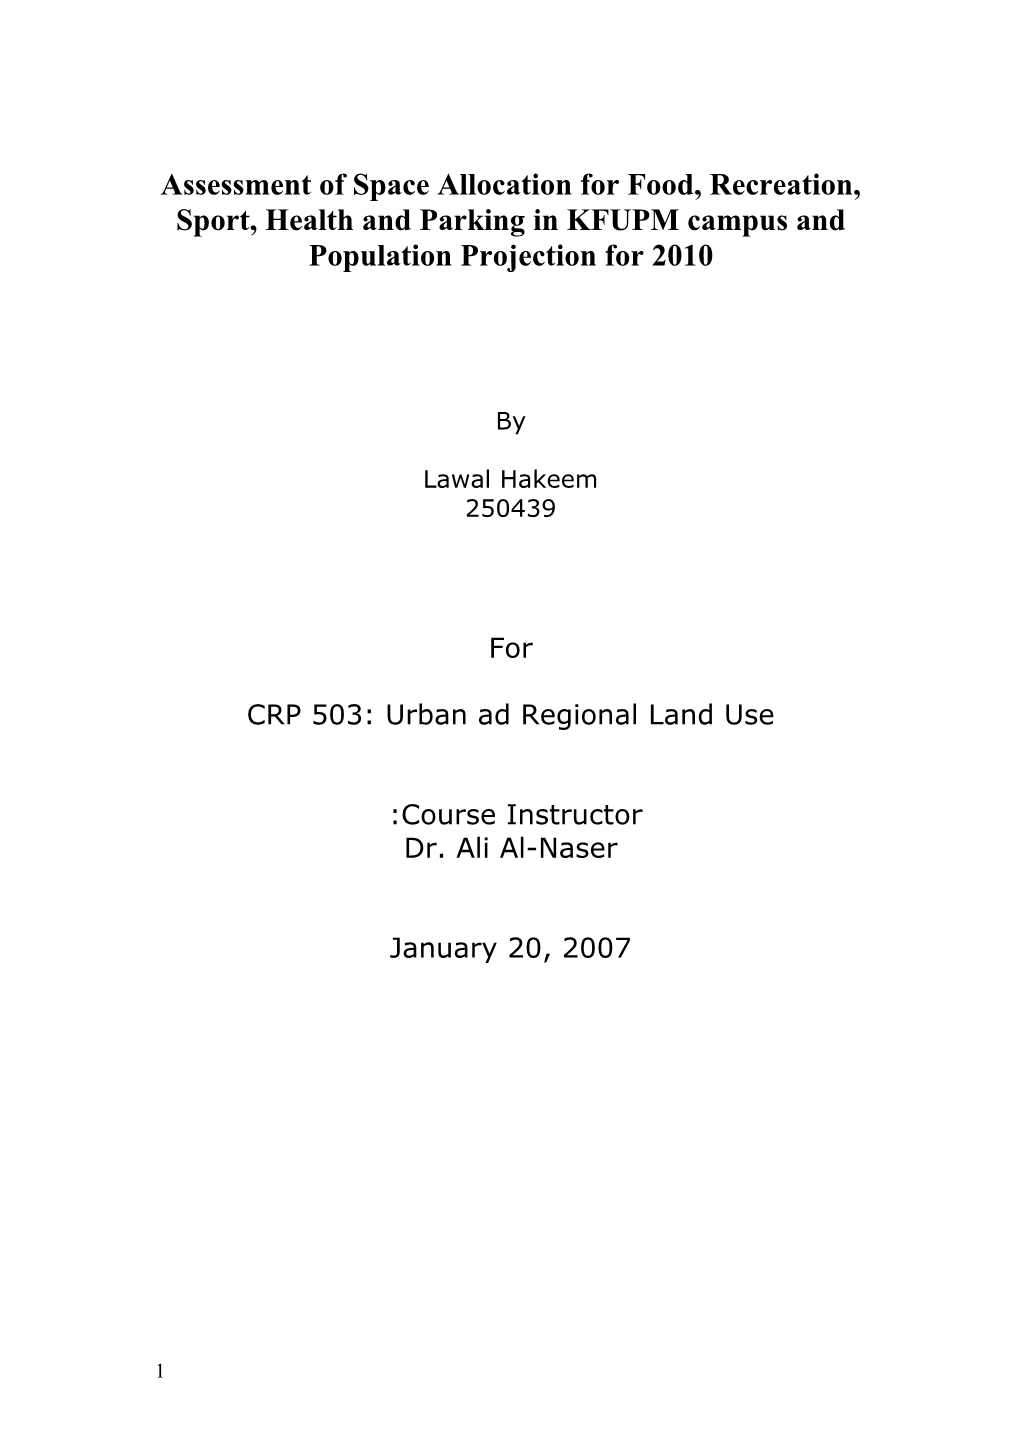 Term Paper Proposal: Urban Infrastructure Planning (CRP 535)